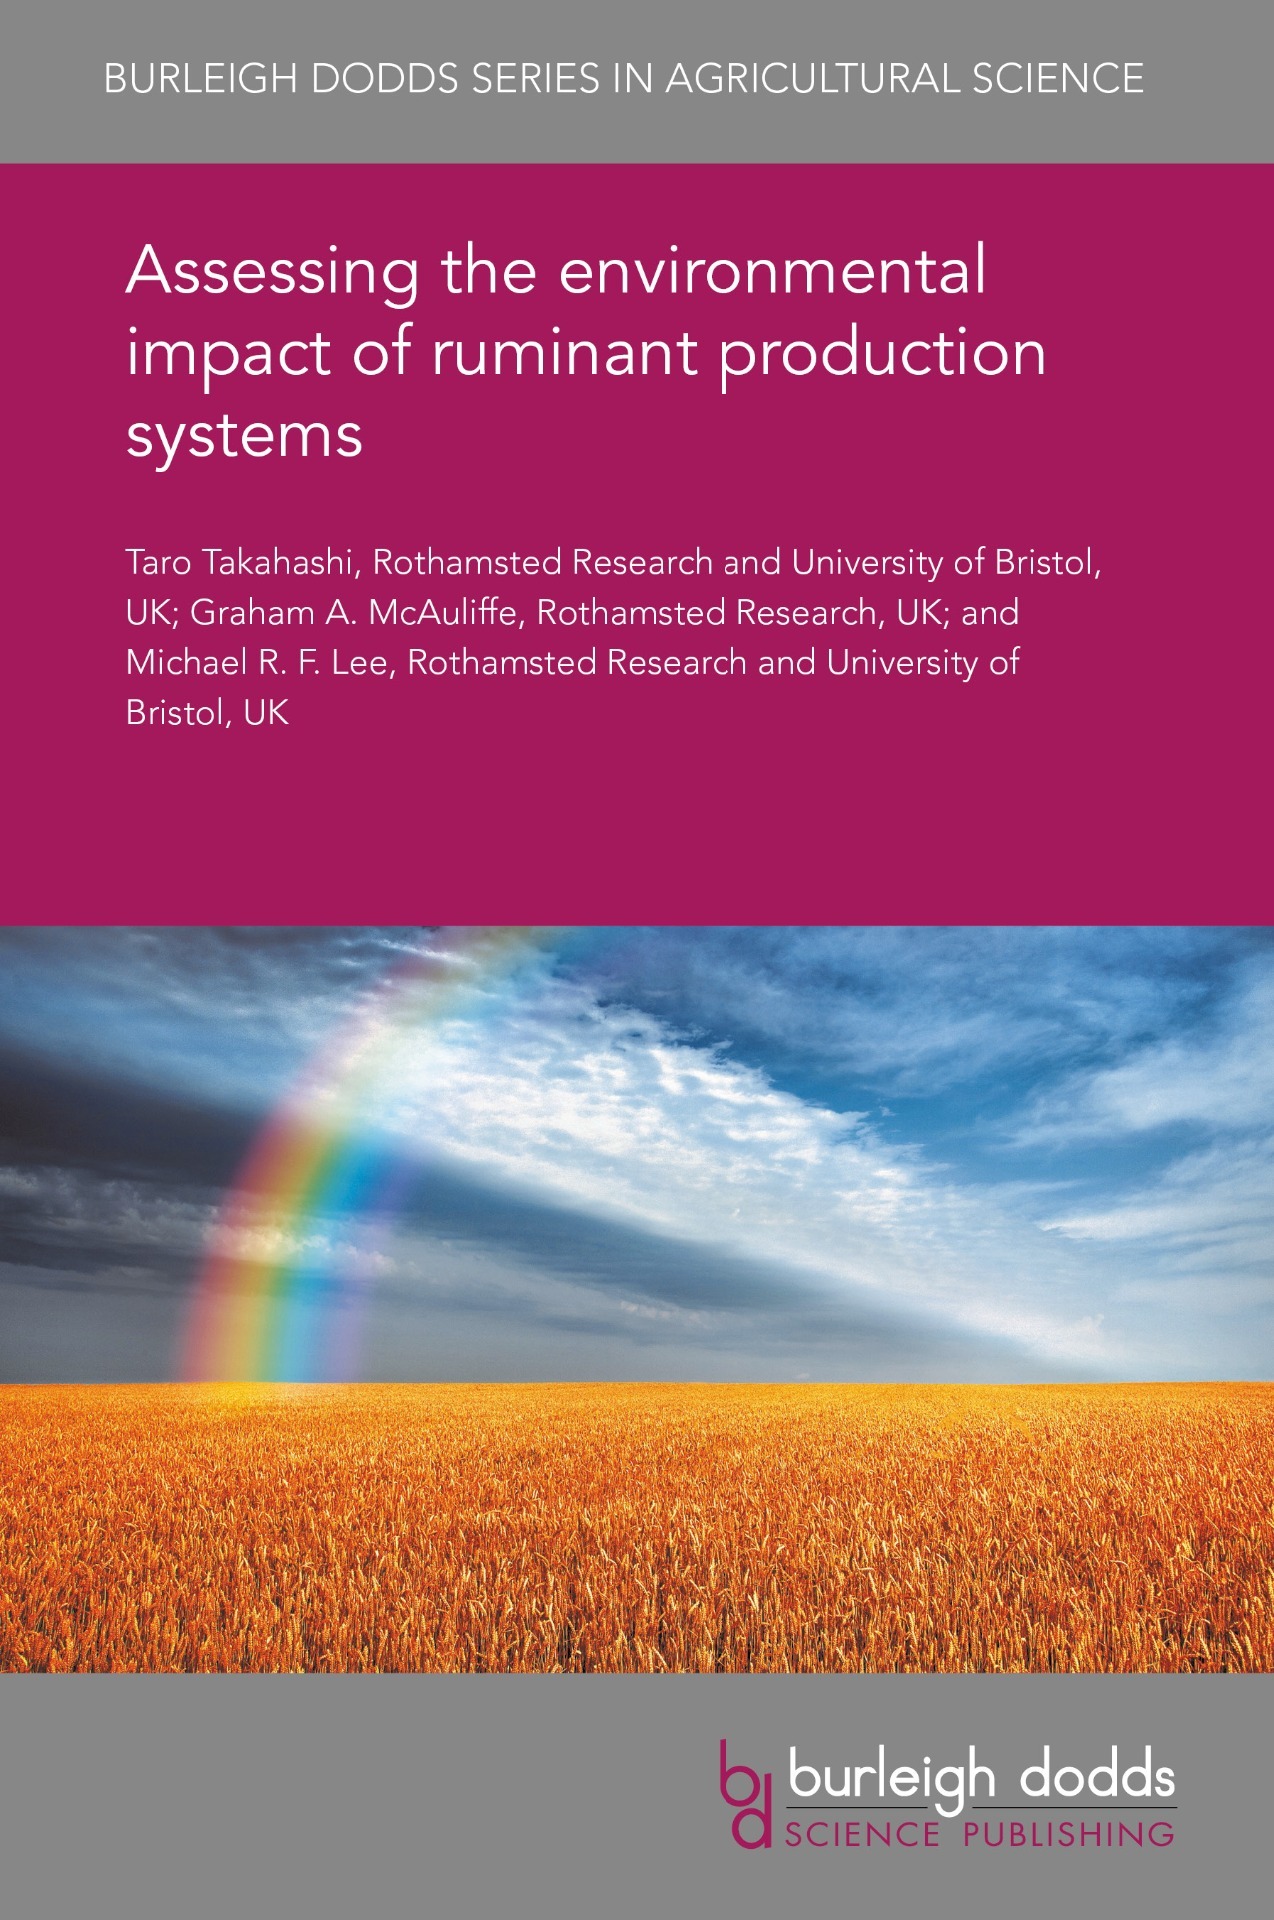 Assessing the environmental impact of ruminant production systems